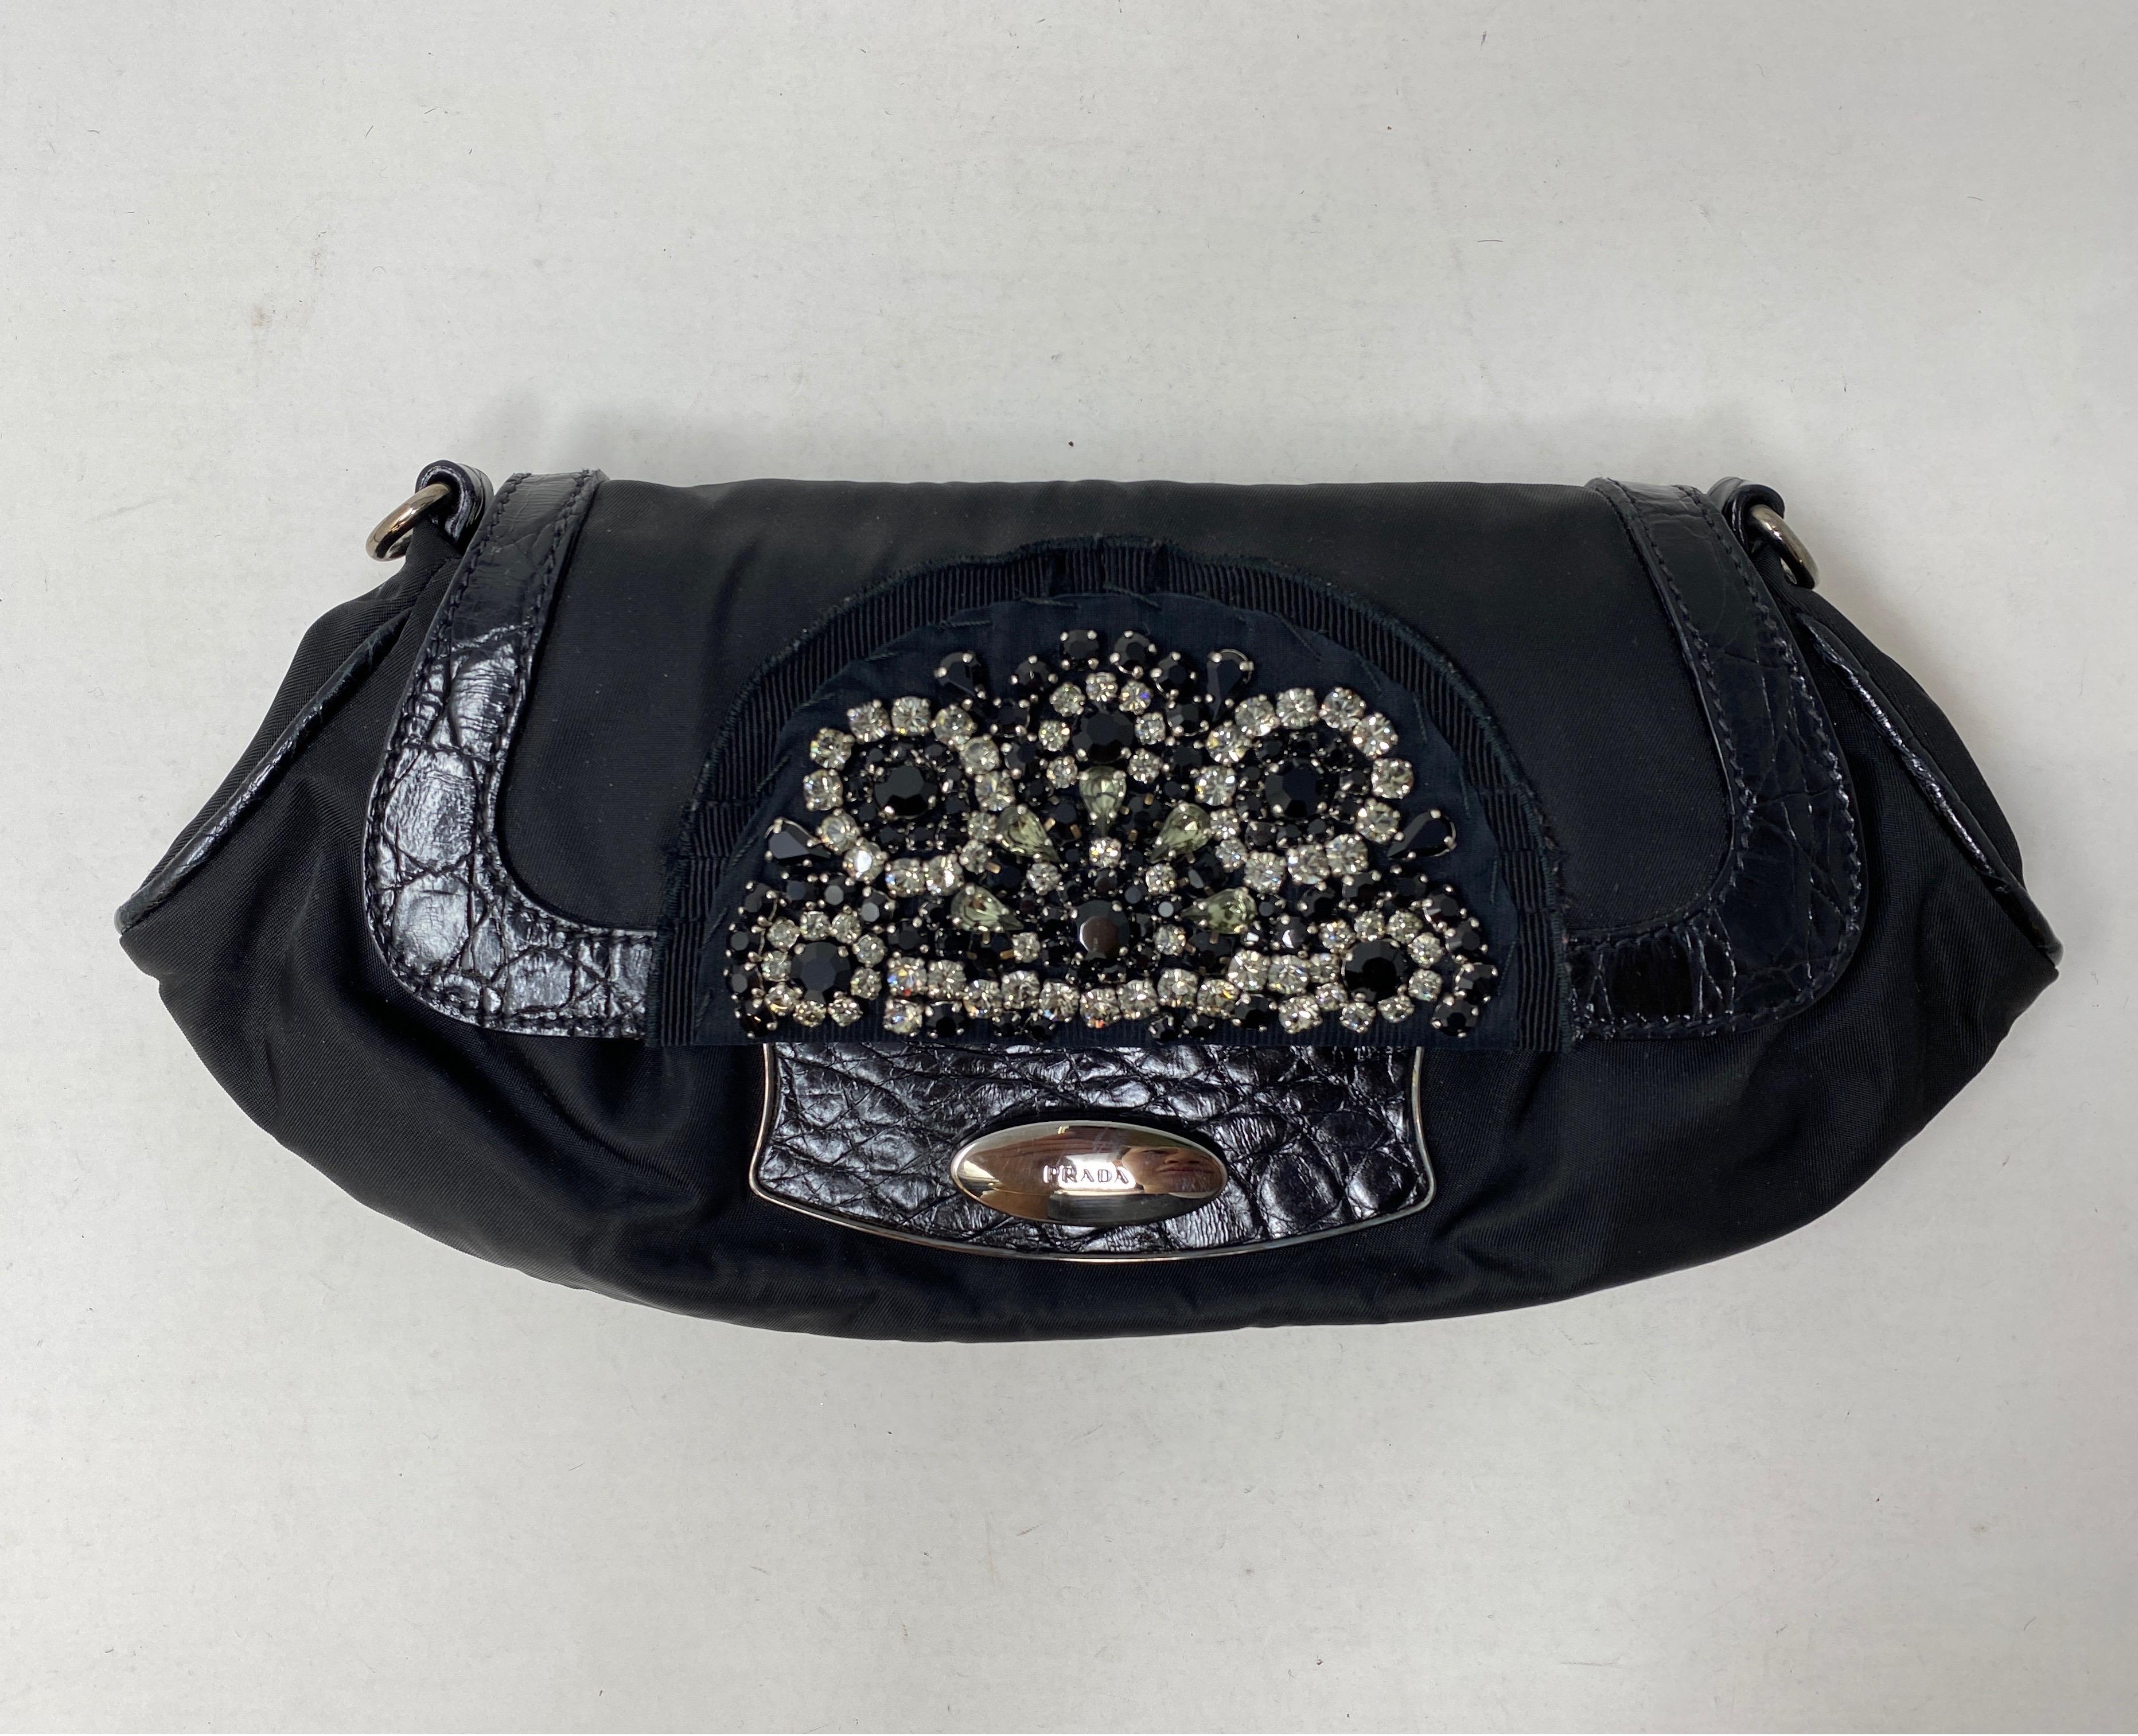 Prada black nylon & leather purse with detachable strap. Stunning beadwork design. Very good condition. Black nylon is back in style. Great for evening or events. Guaranteed authentic. 